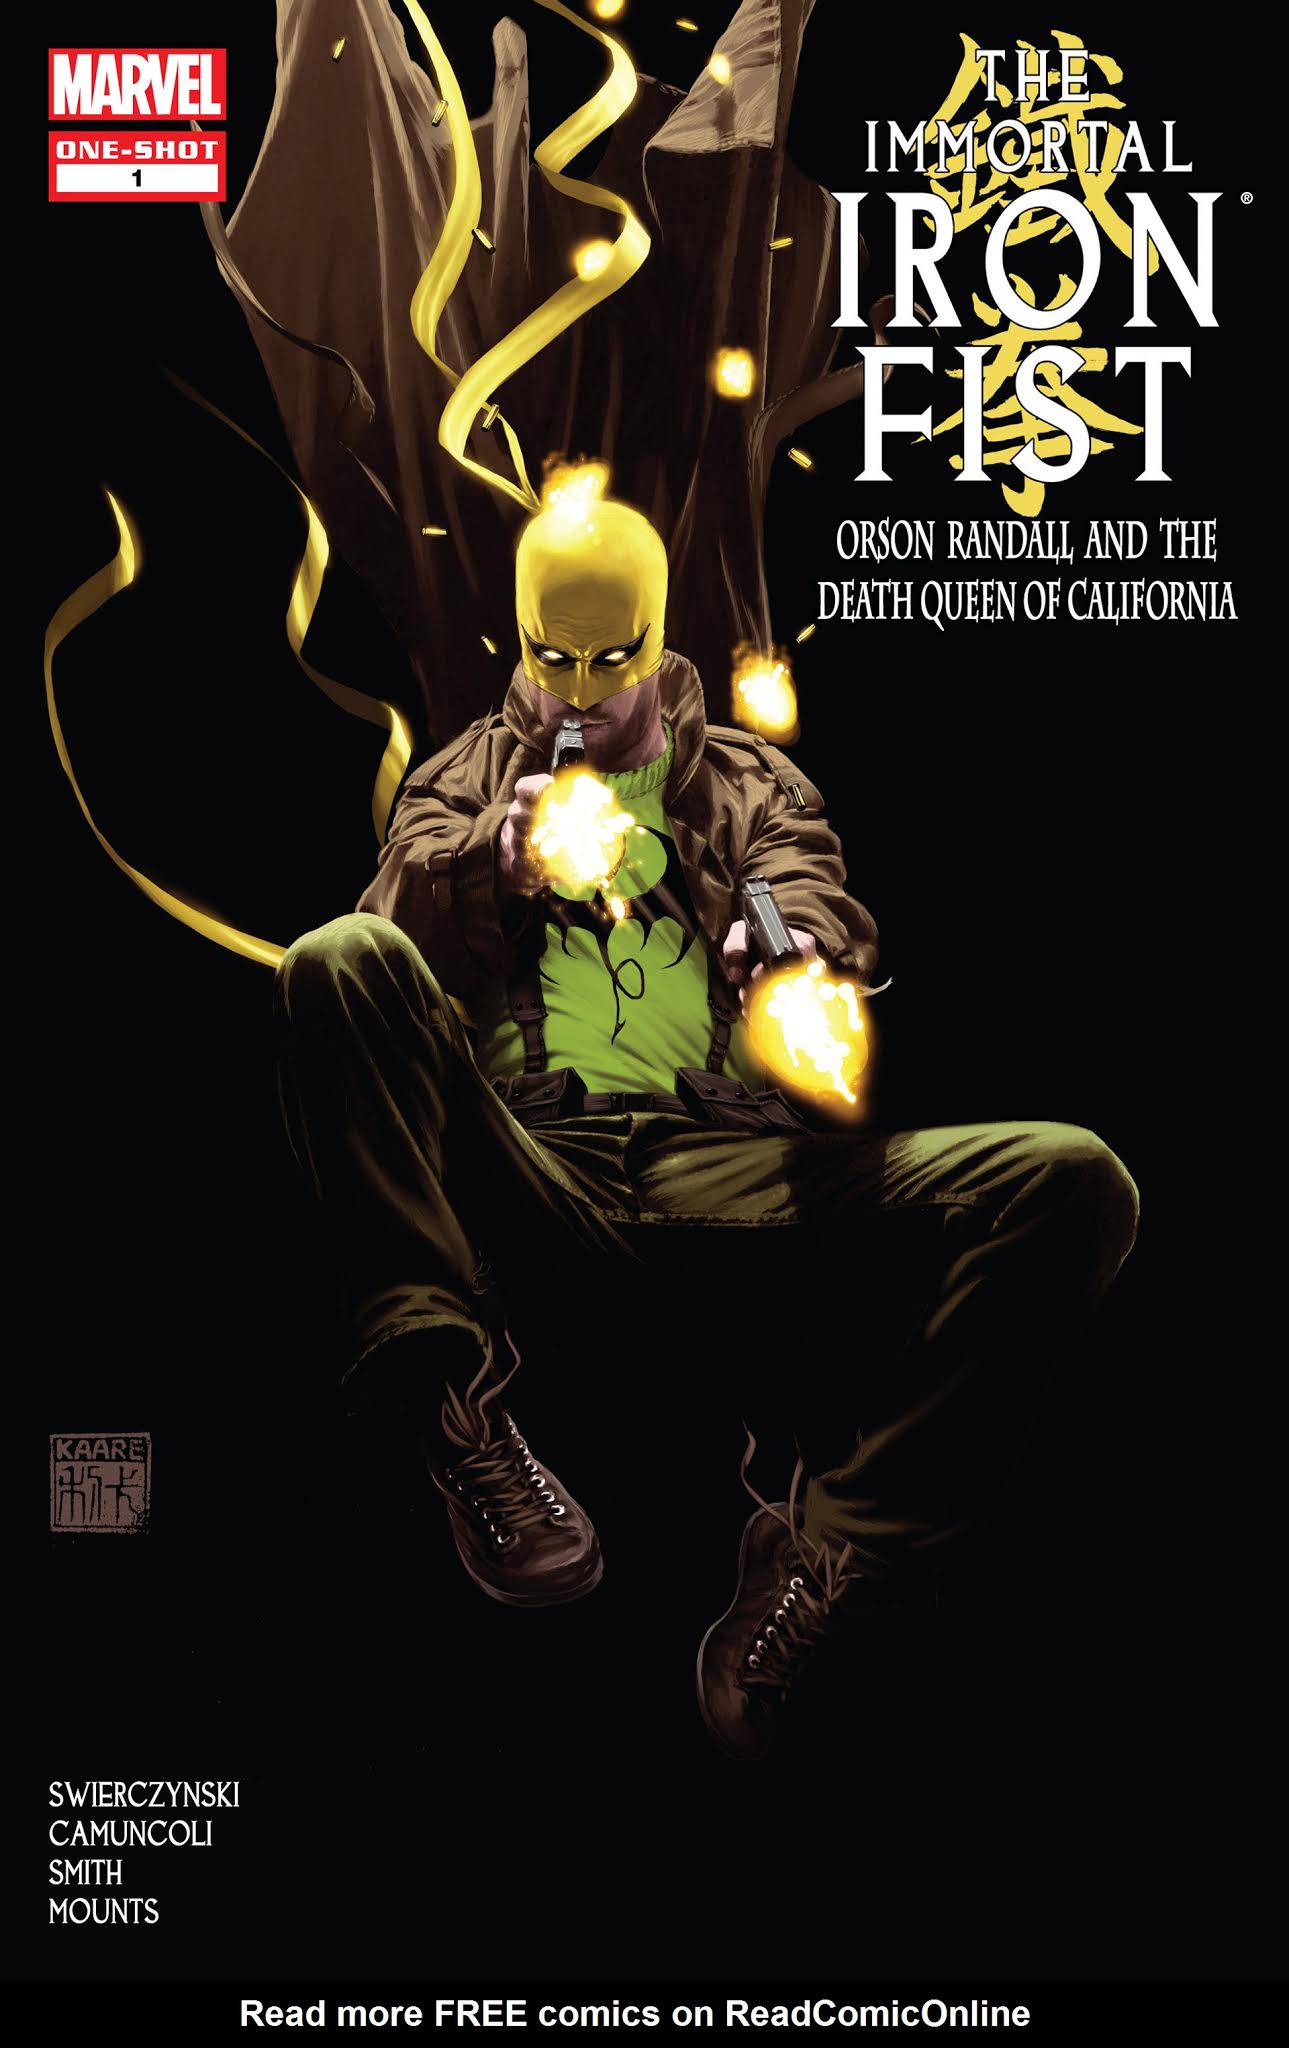 The Immortal Iron Fist: Orson Randall and The Death Queen of California Full Page 1